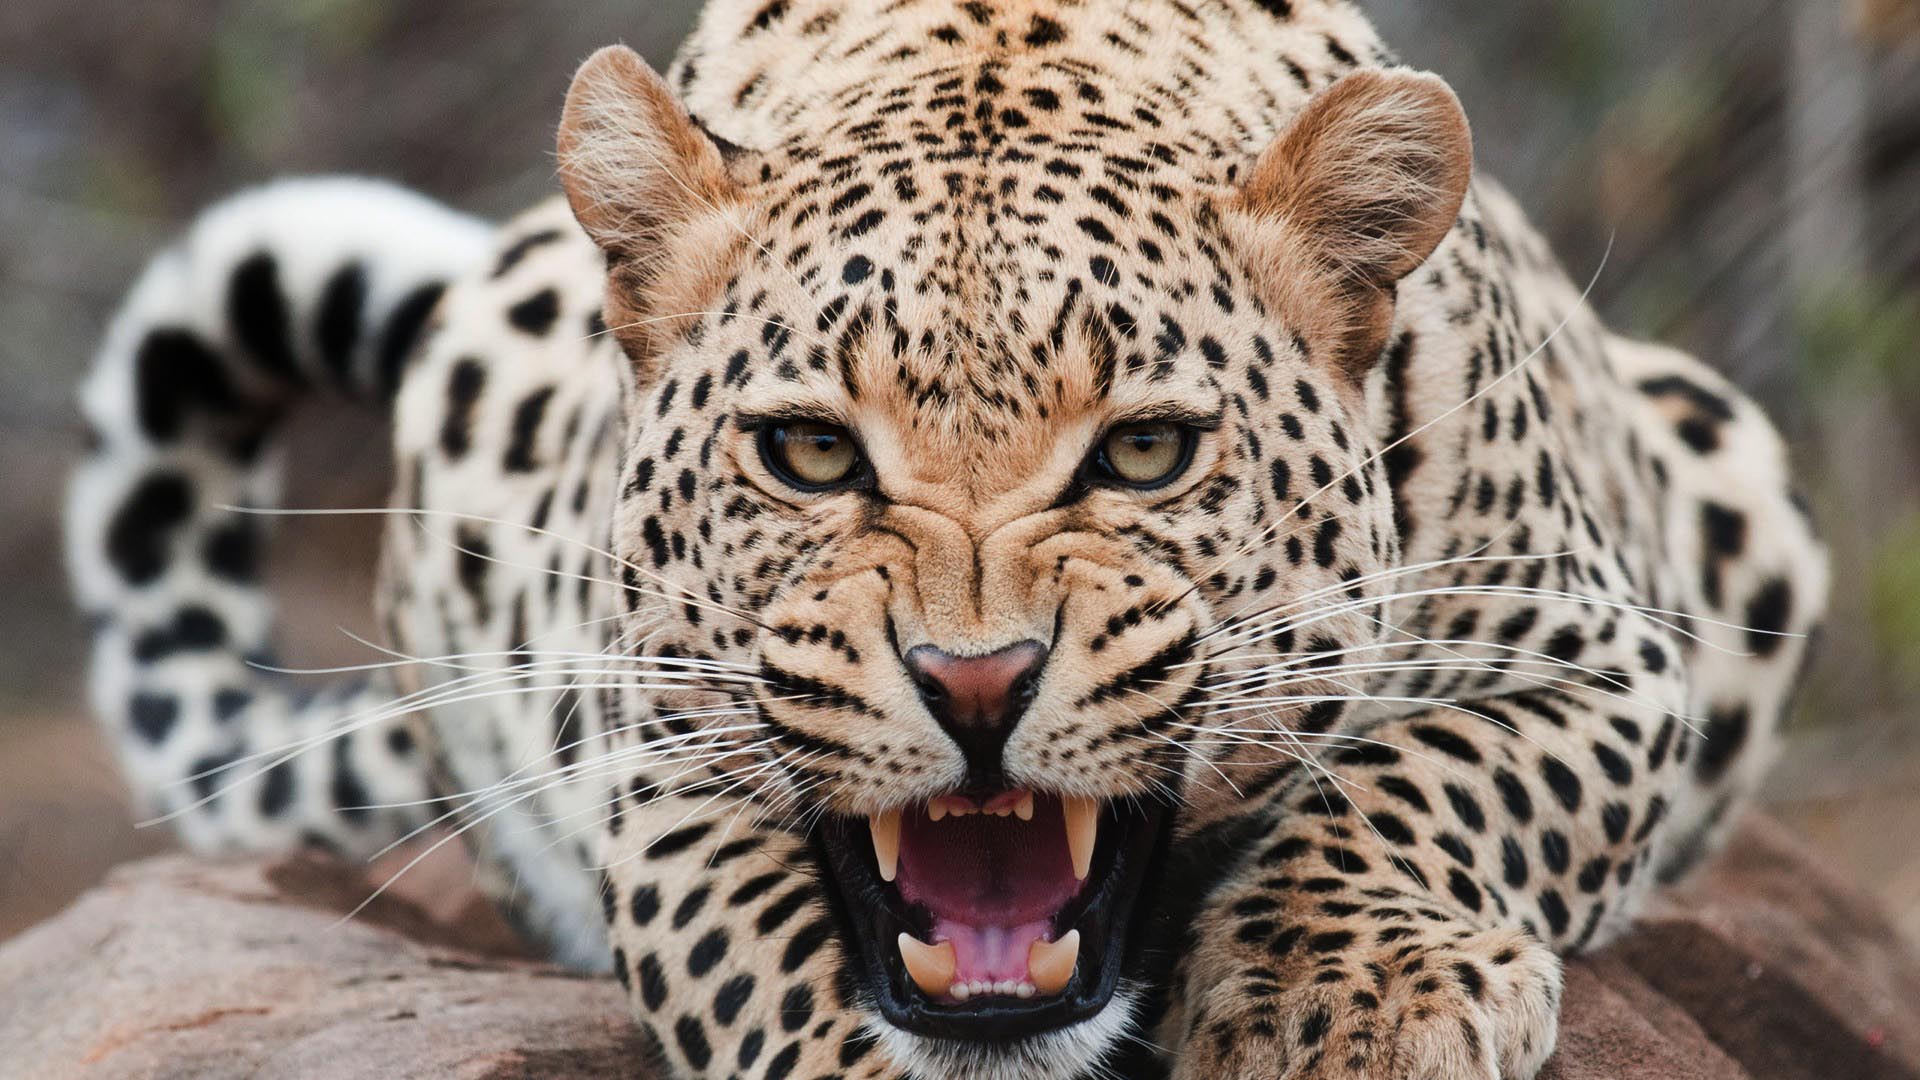 ... angry-leopard-hd-wallpapers-free-downlaod-animal-background- animals_hdwallpaper_leopard_57827 ...